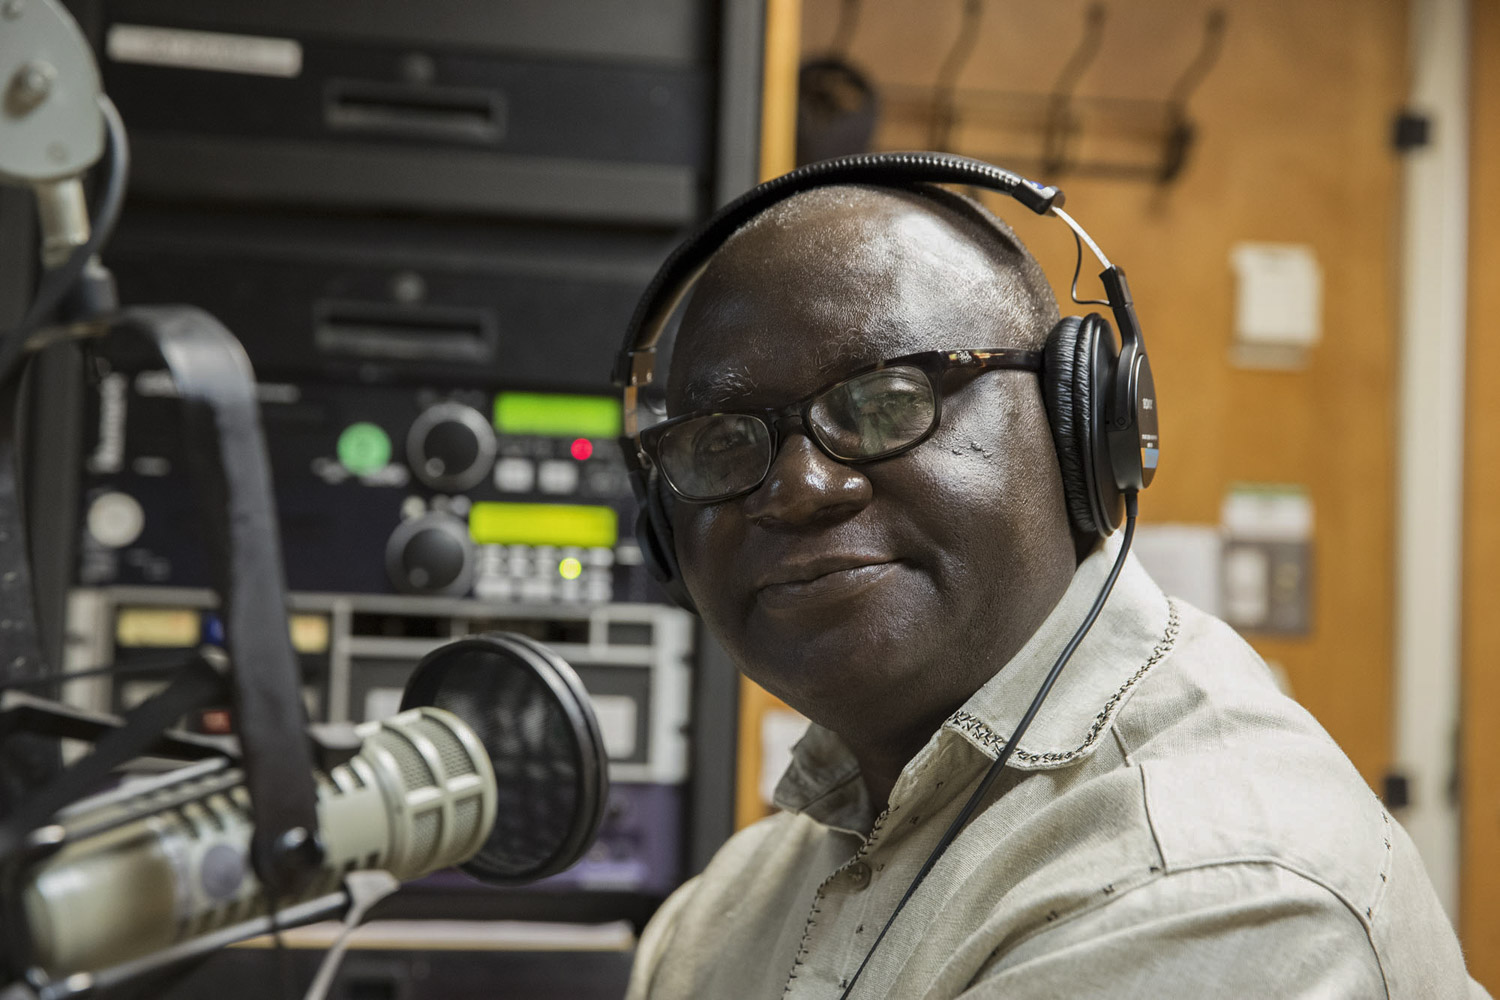 Kwesi Ghartey-Tagoe smiling at the camera in front of a microphone wearing headphones